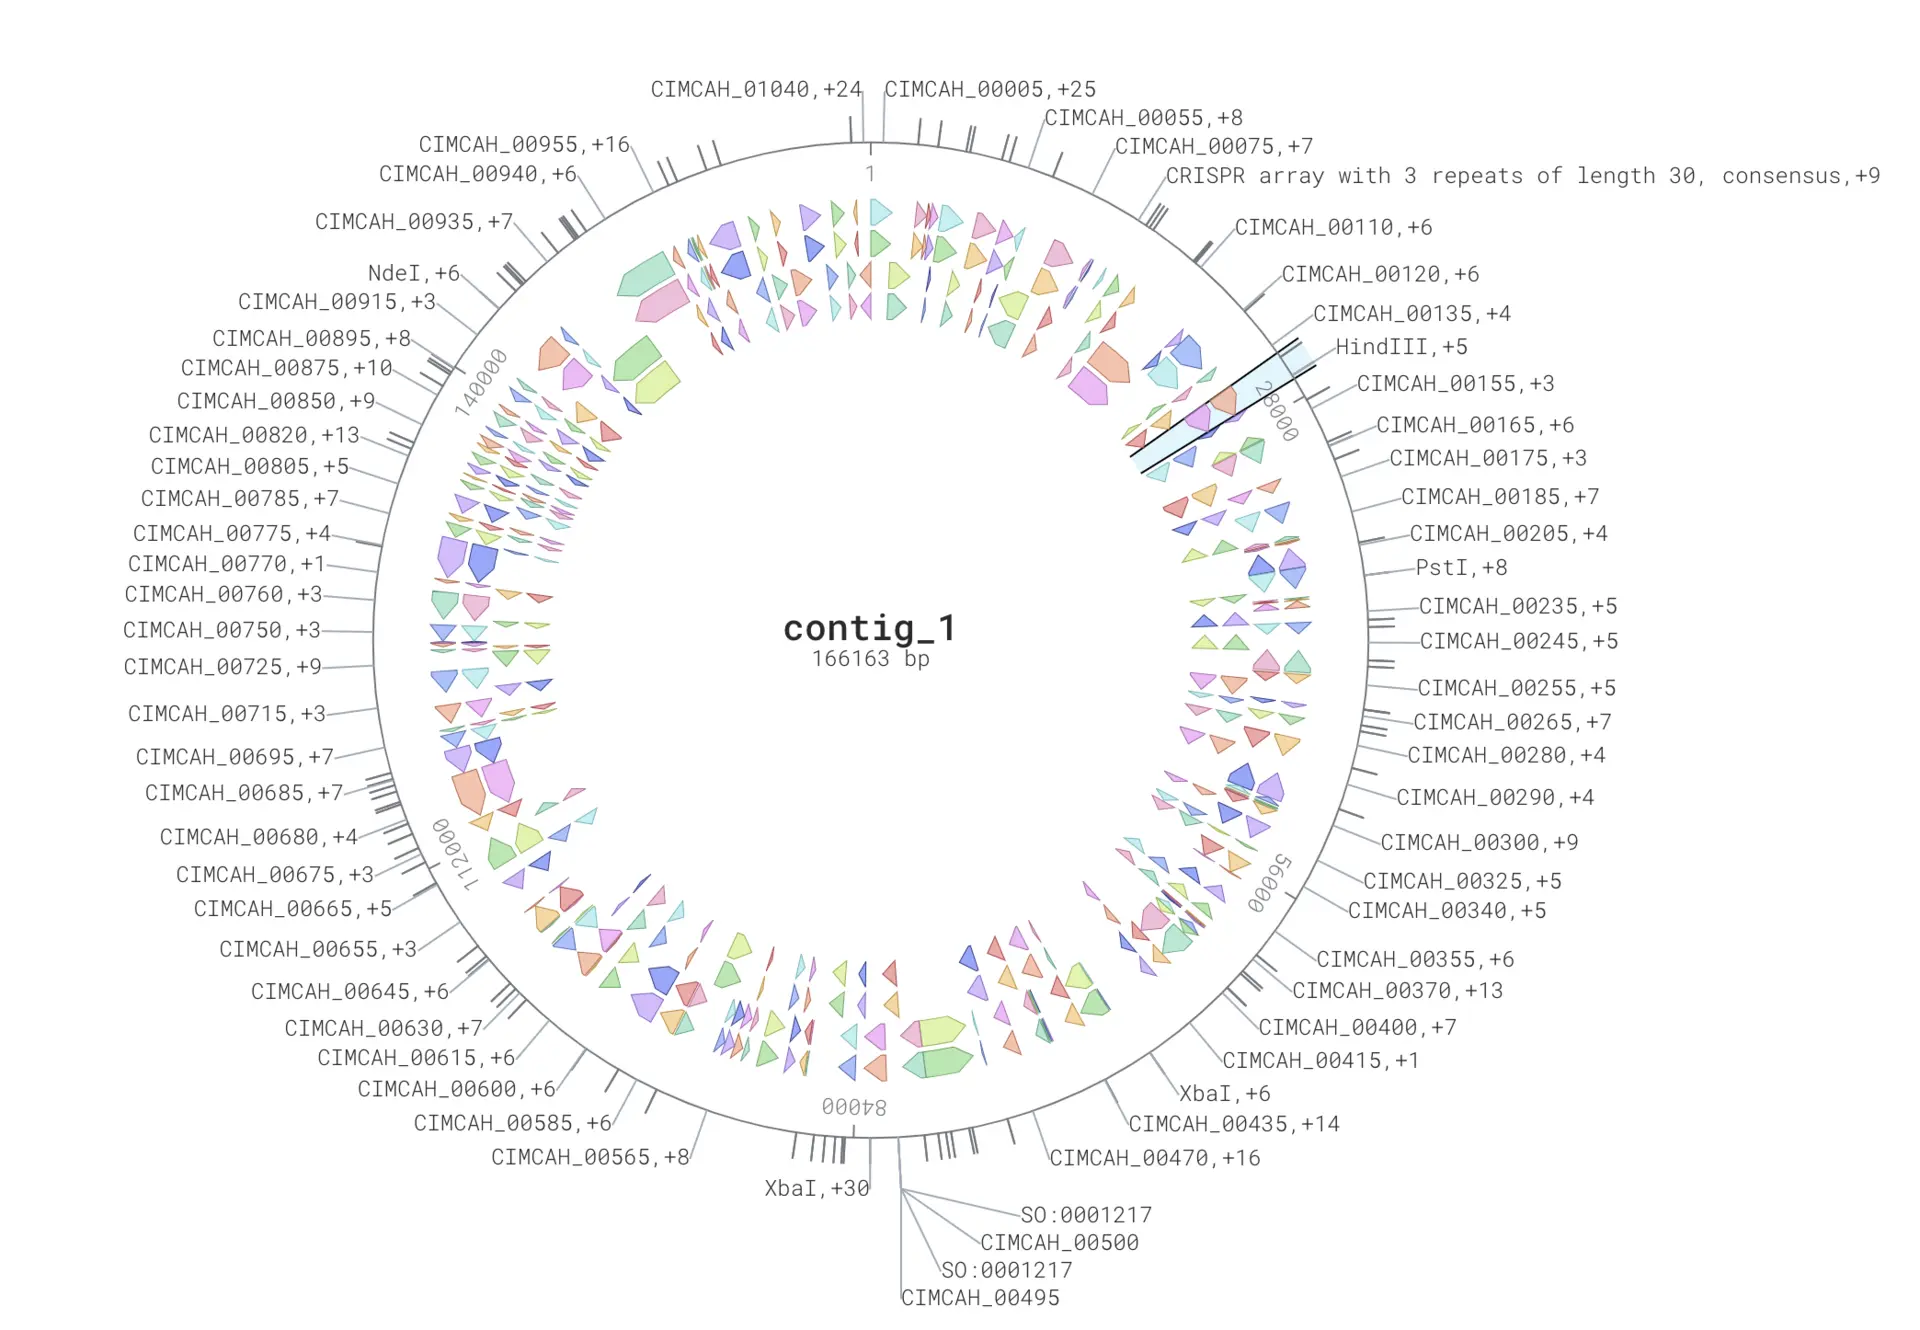 You can annotate genes in bacterial genomes with DNA visualizer